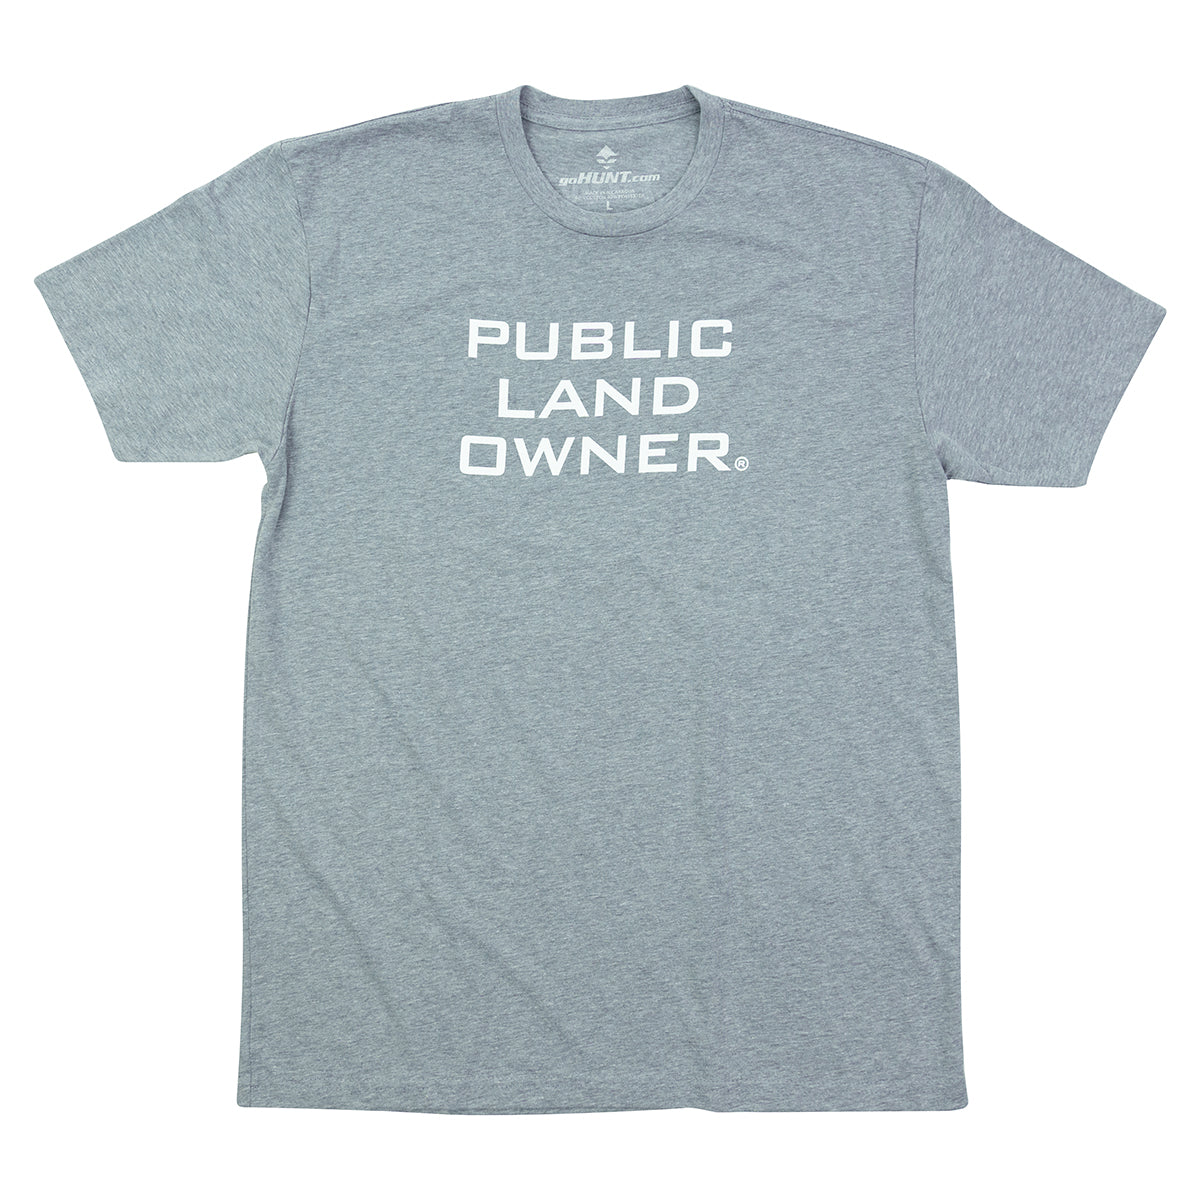 Public Land Owner T-Shirt (GOHUNT Edition) in Public Land Owner T-Shirt (goHUNT Edition) by goHUNT | Apparel - goHUNT Shop by GOHUNT | GOHUNT - GOHUNT Shop